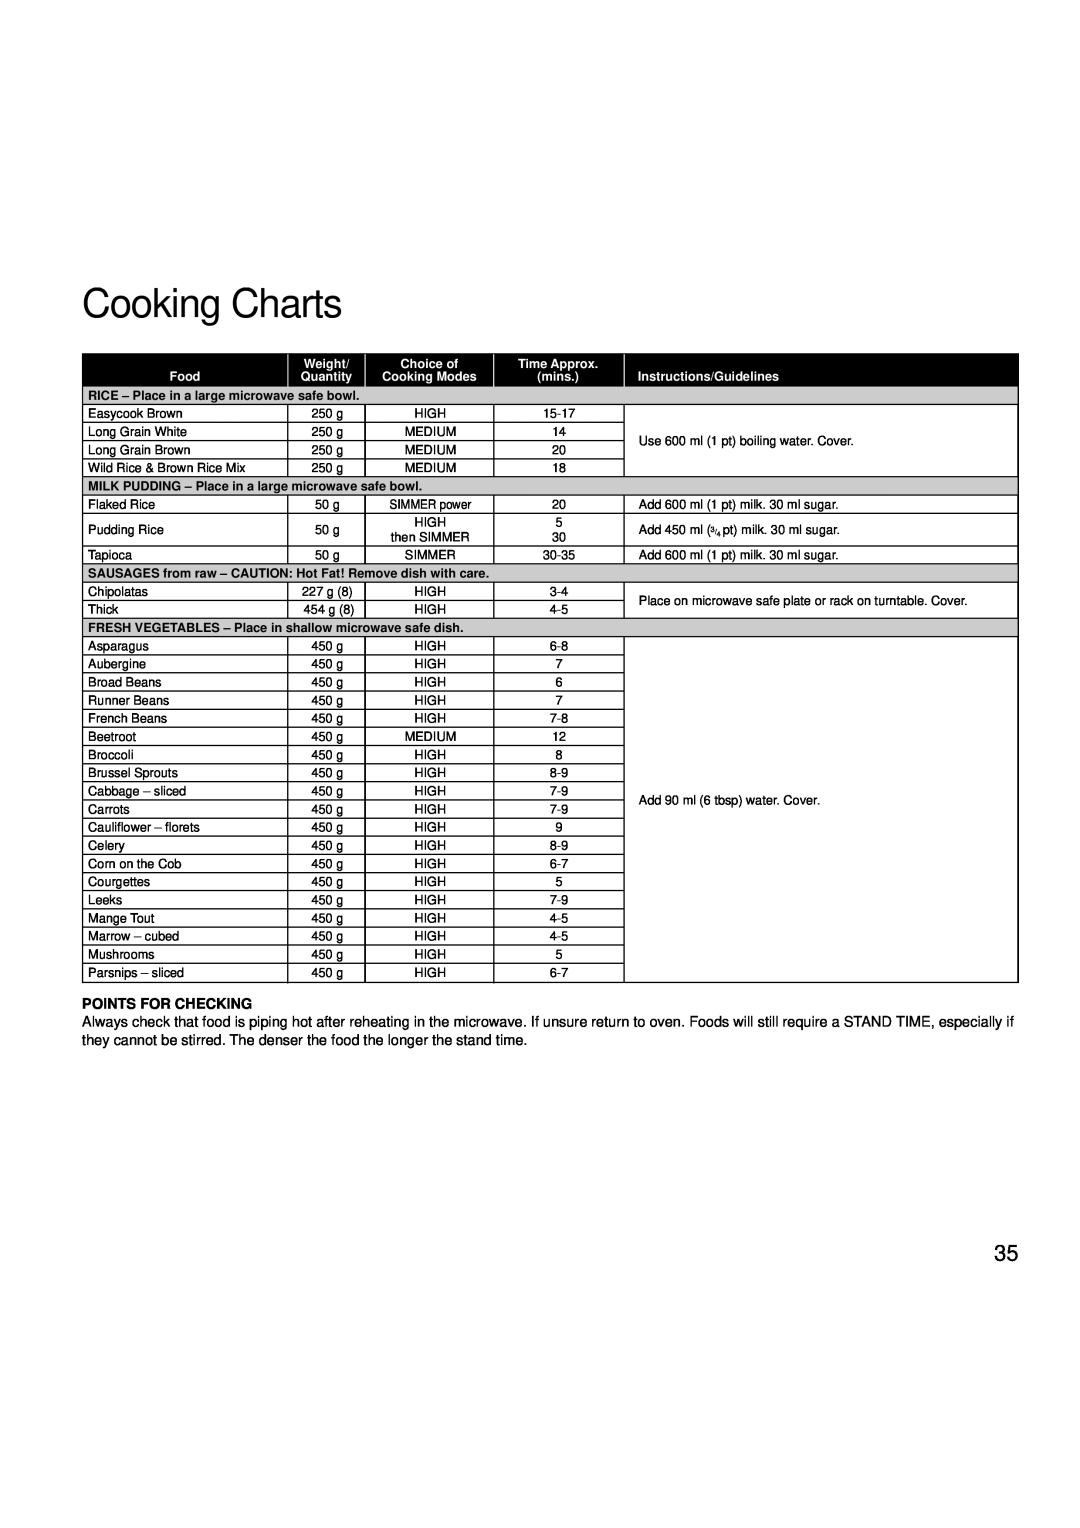 Creda MBO55 Cooking Charts, Points For Checking, Weight, Choice of, Time Approx, Food, Quantity, Instructions/Guidelines 